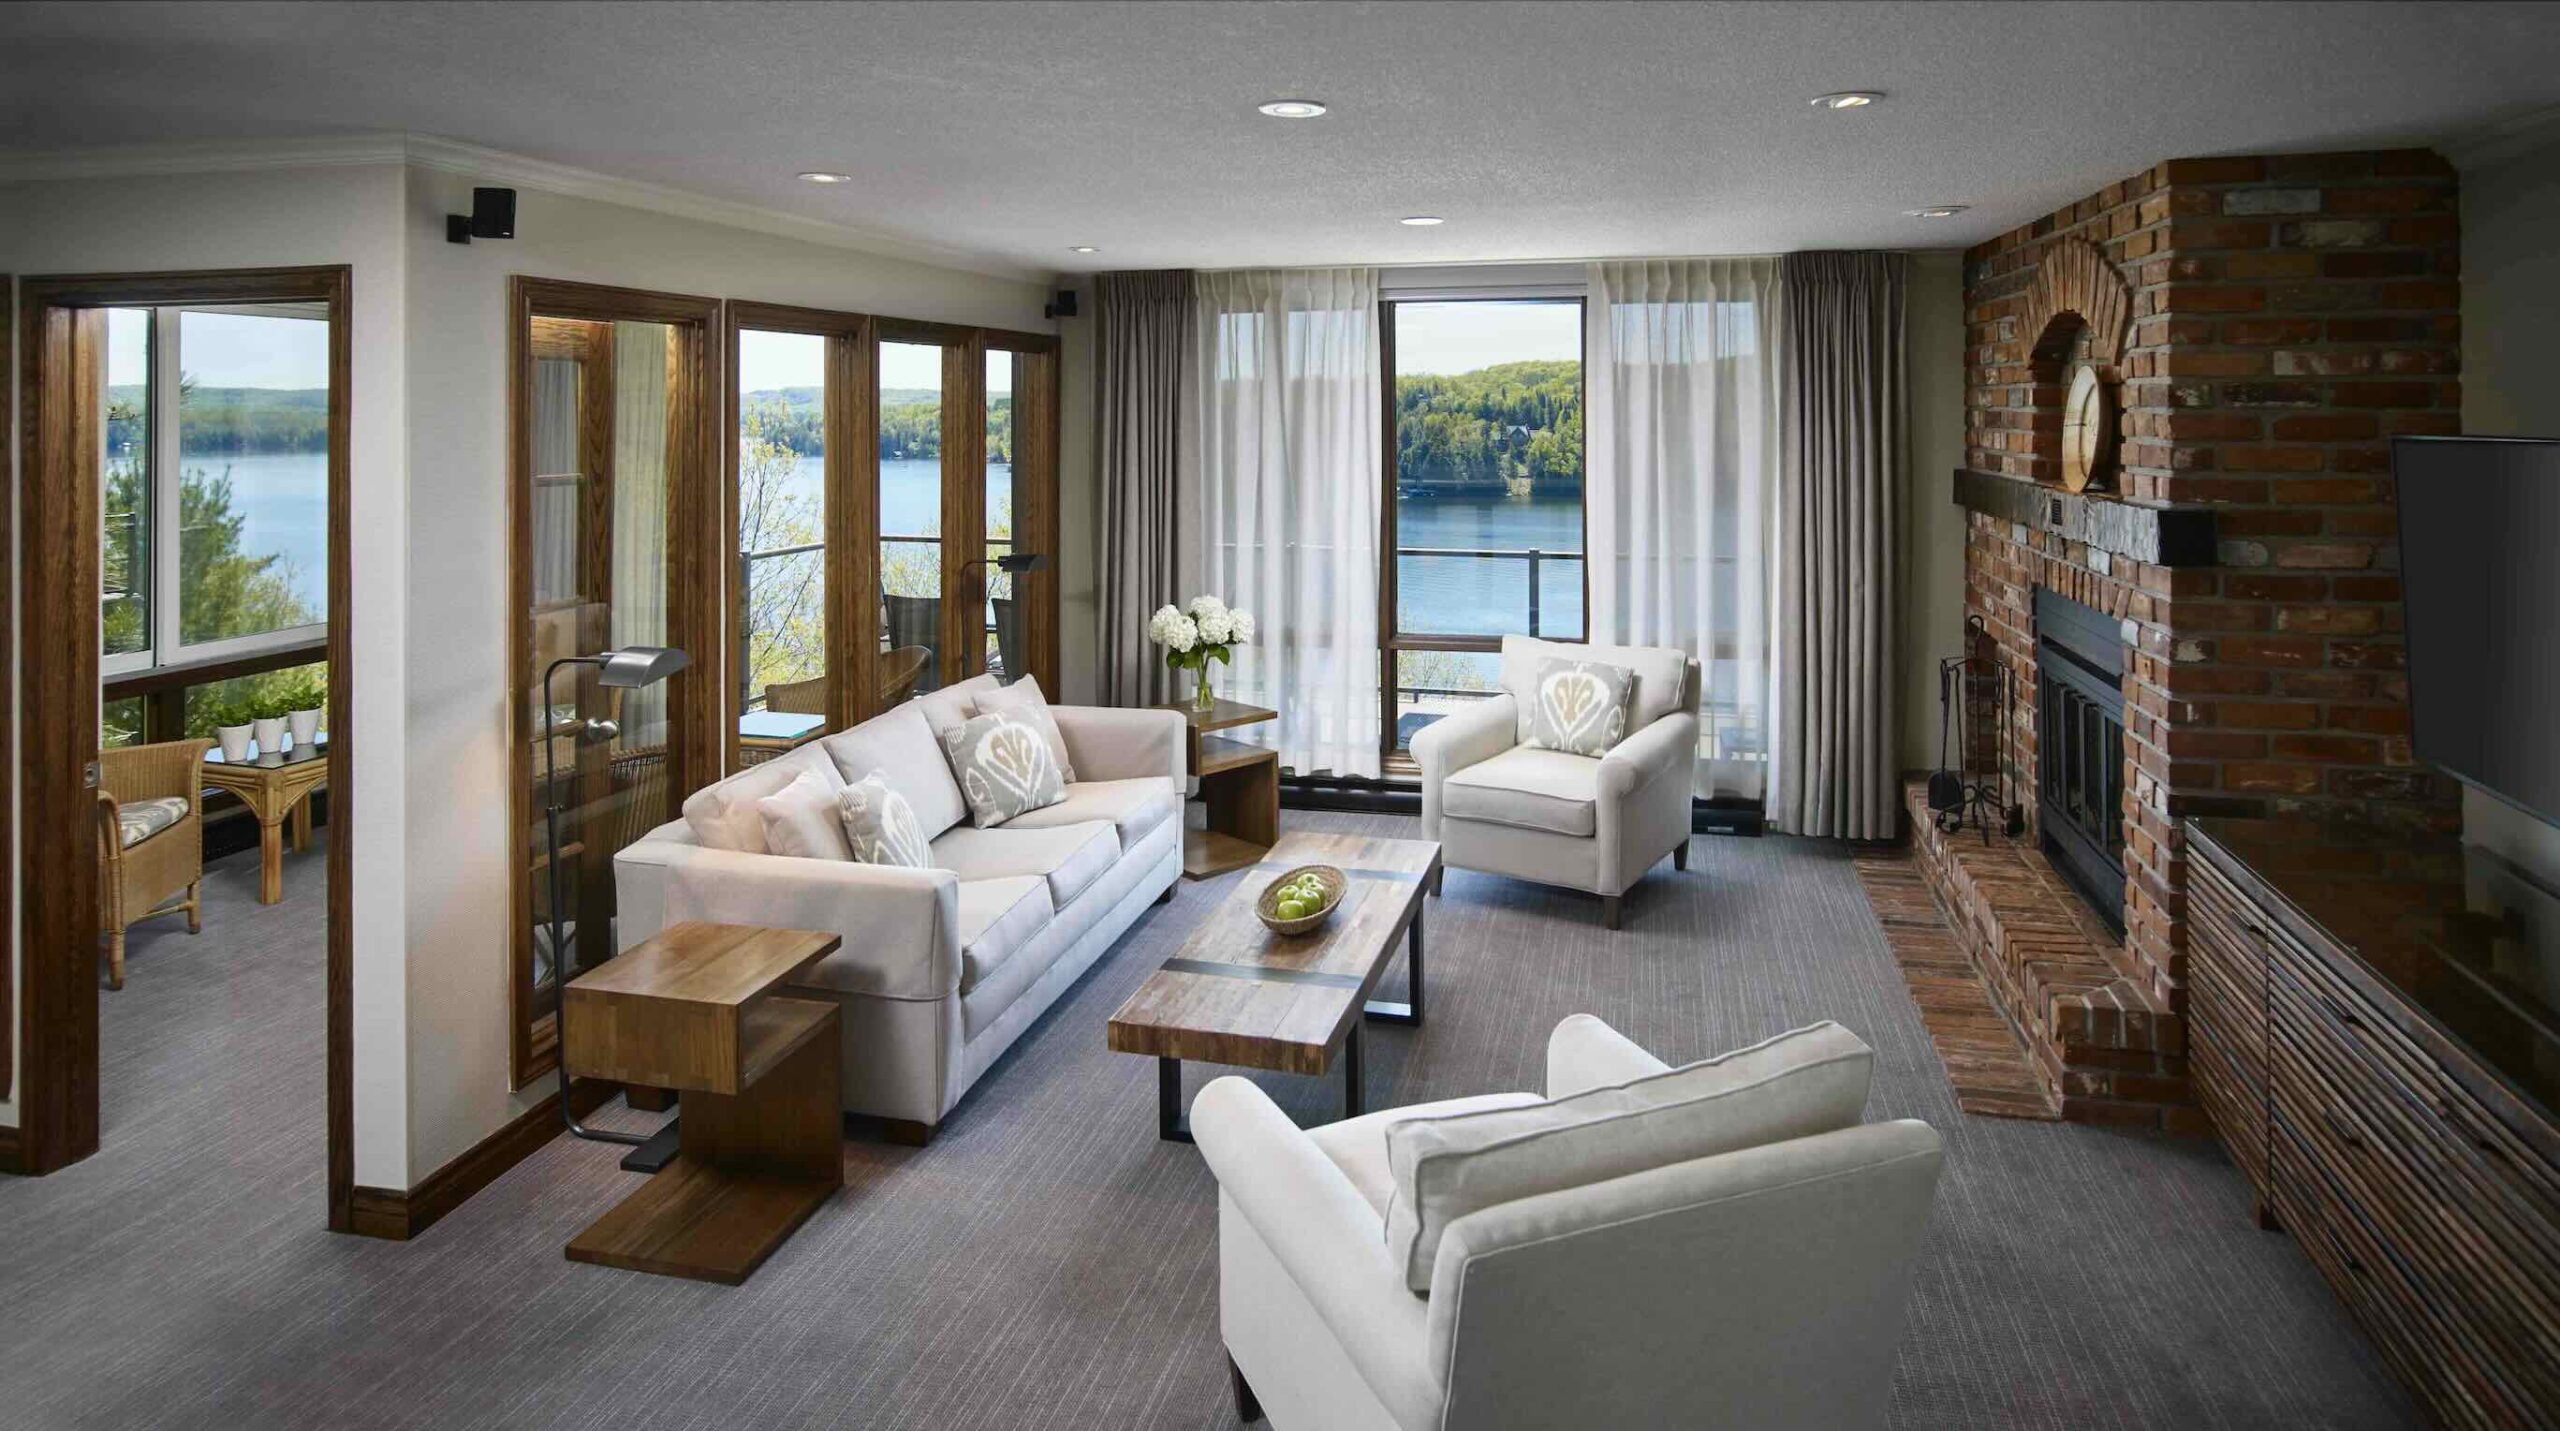 Condo Living Room lake view with sunroom at one of the best all-inclusive resorts in Ontario, Deerhurst Resort